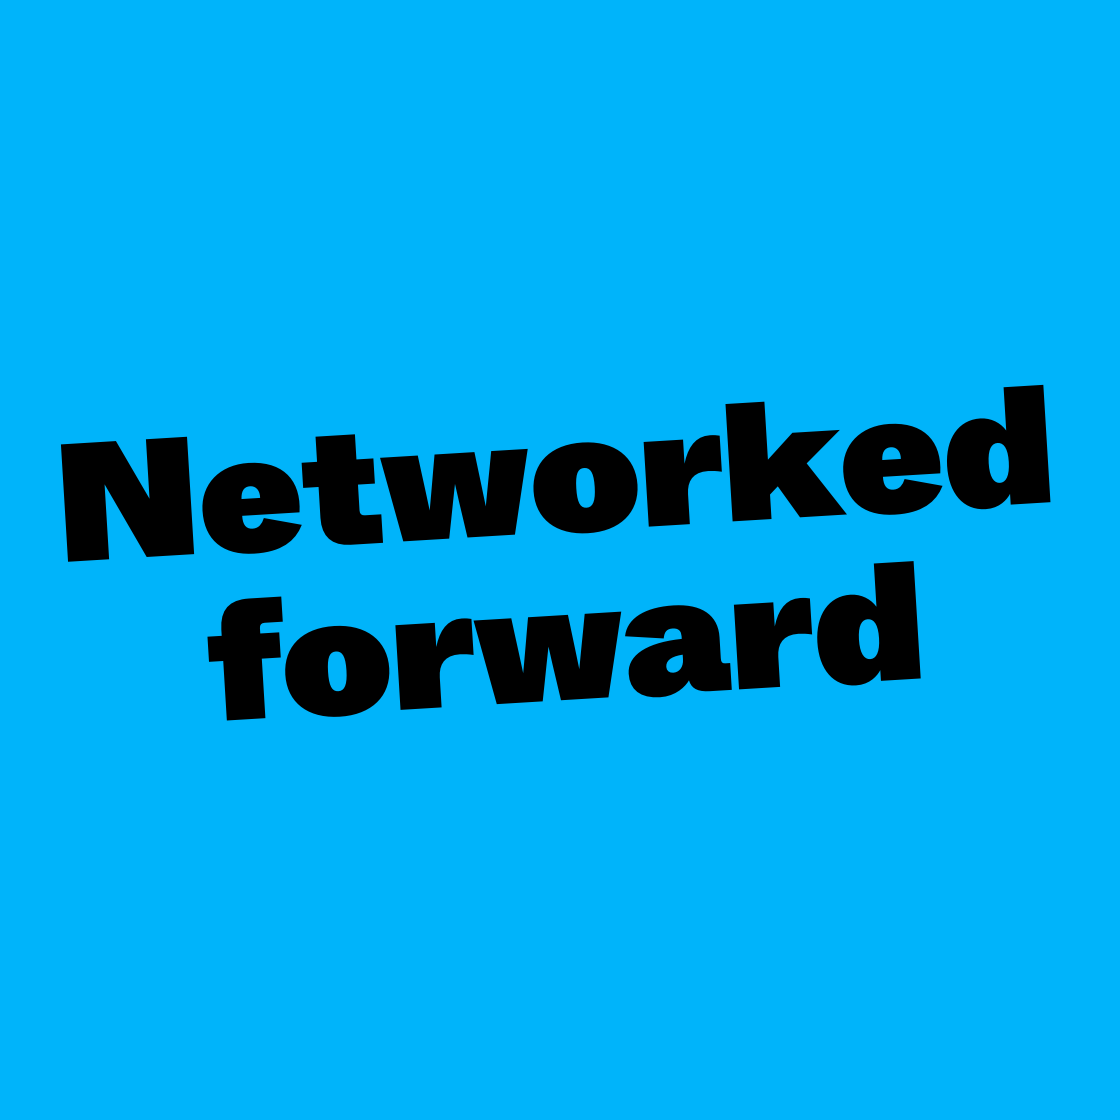 Networked forward